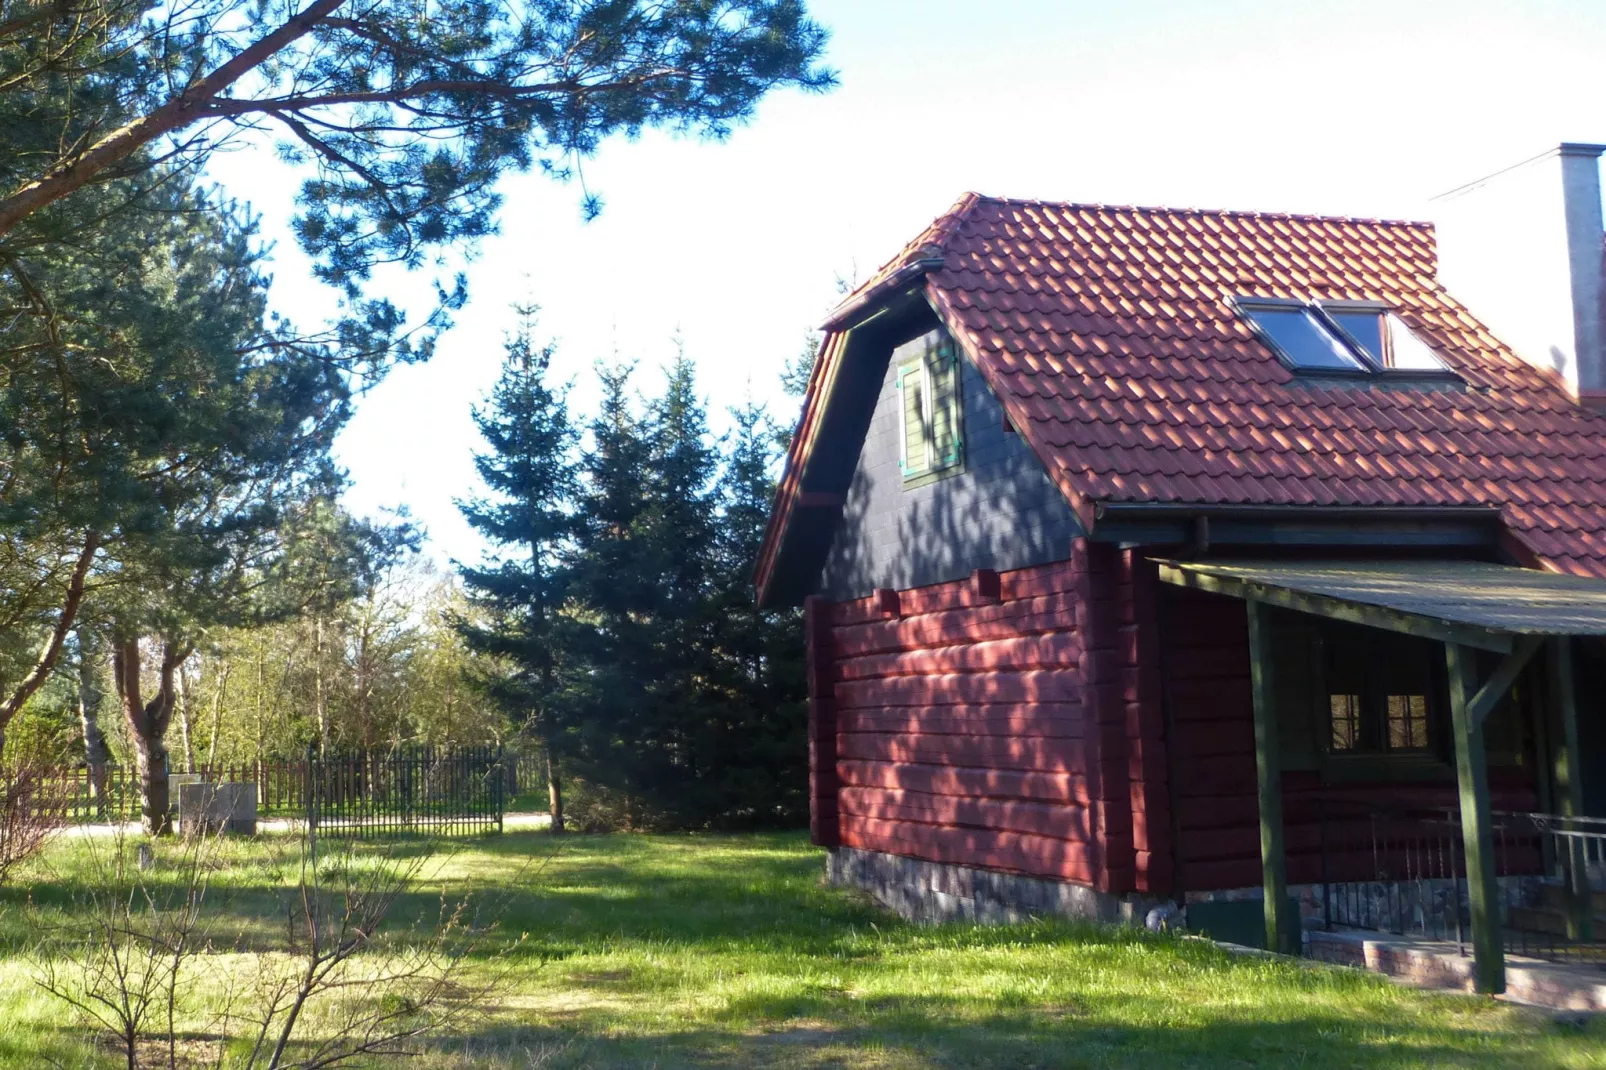 House in the Kashubian village-Tuinen zomer